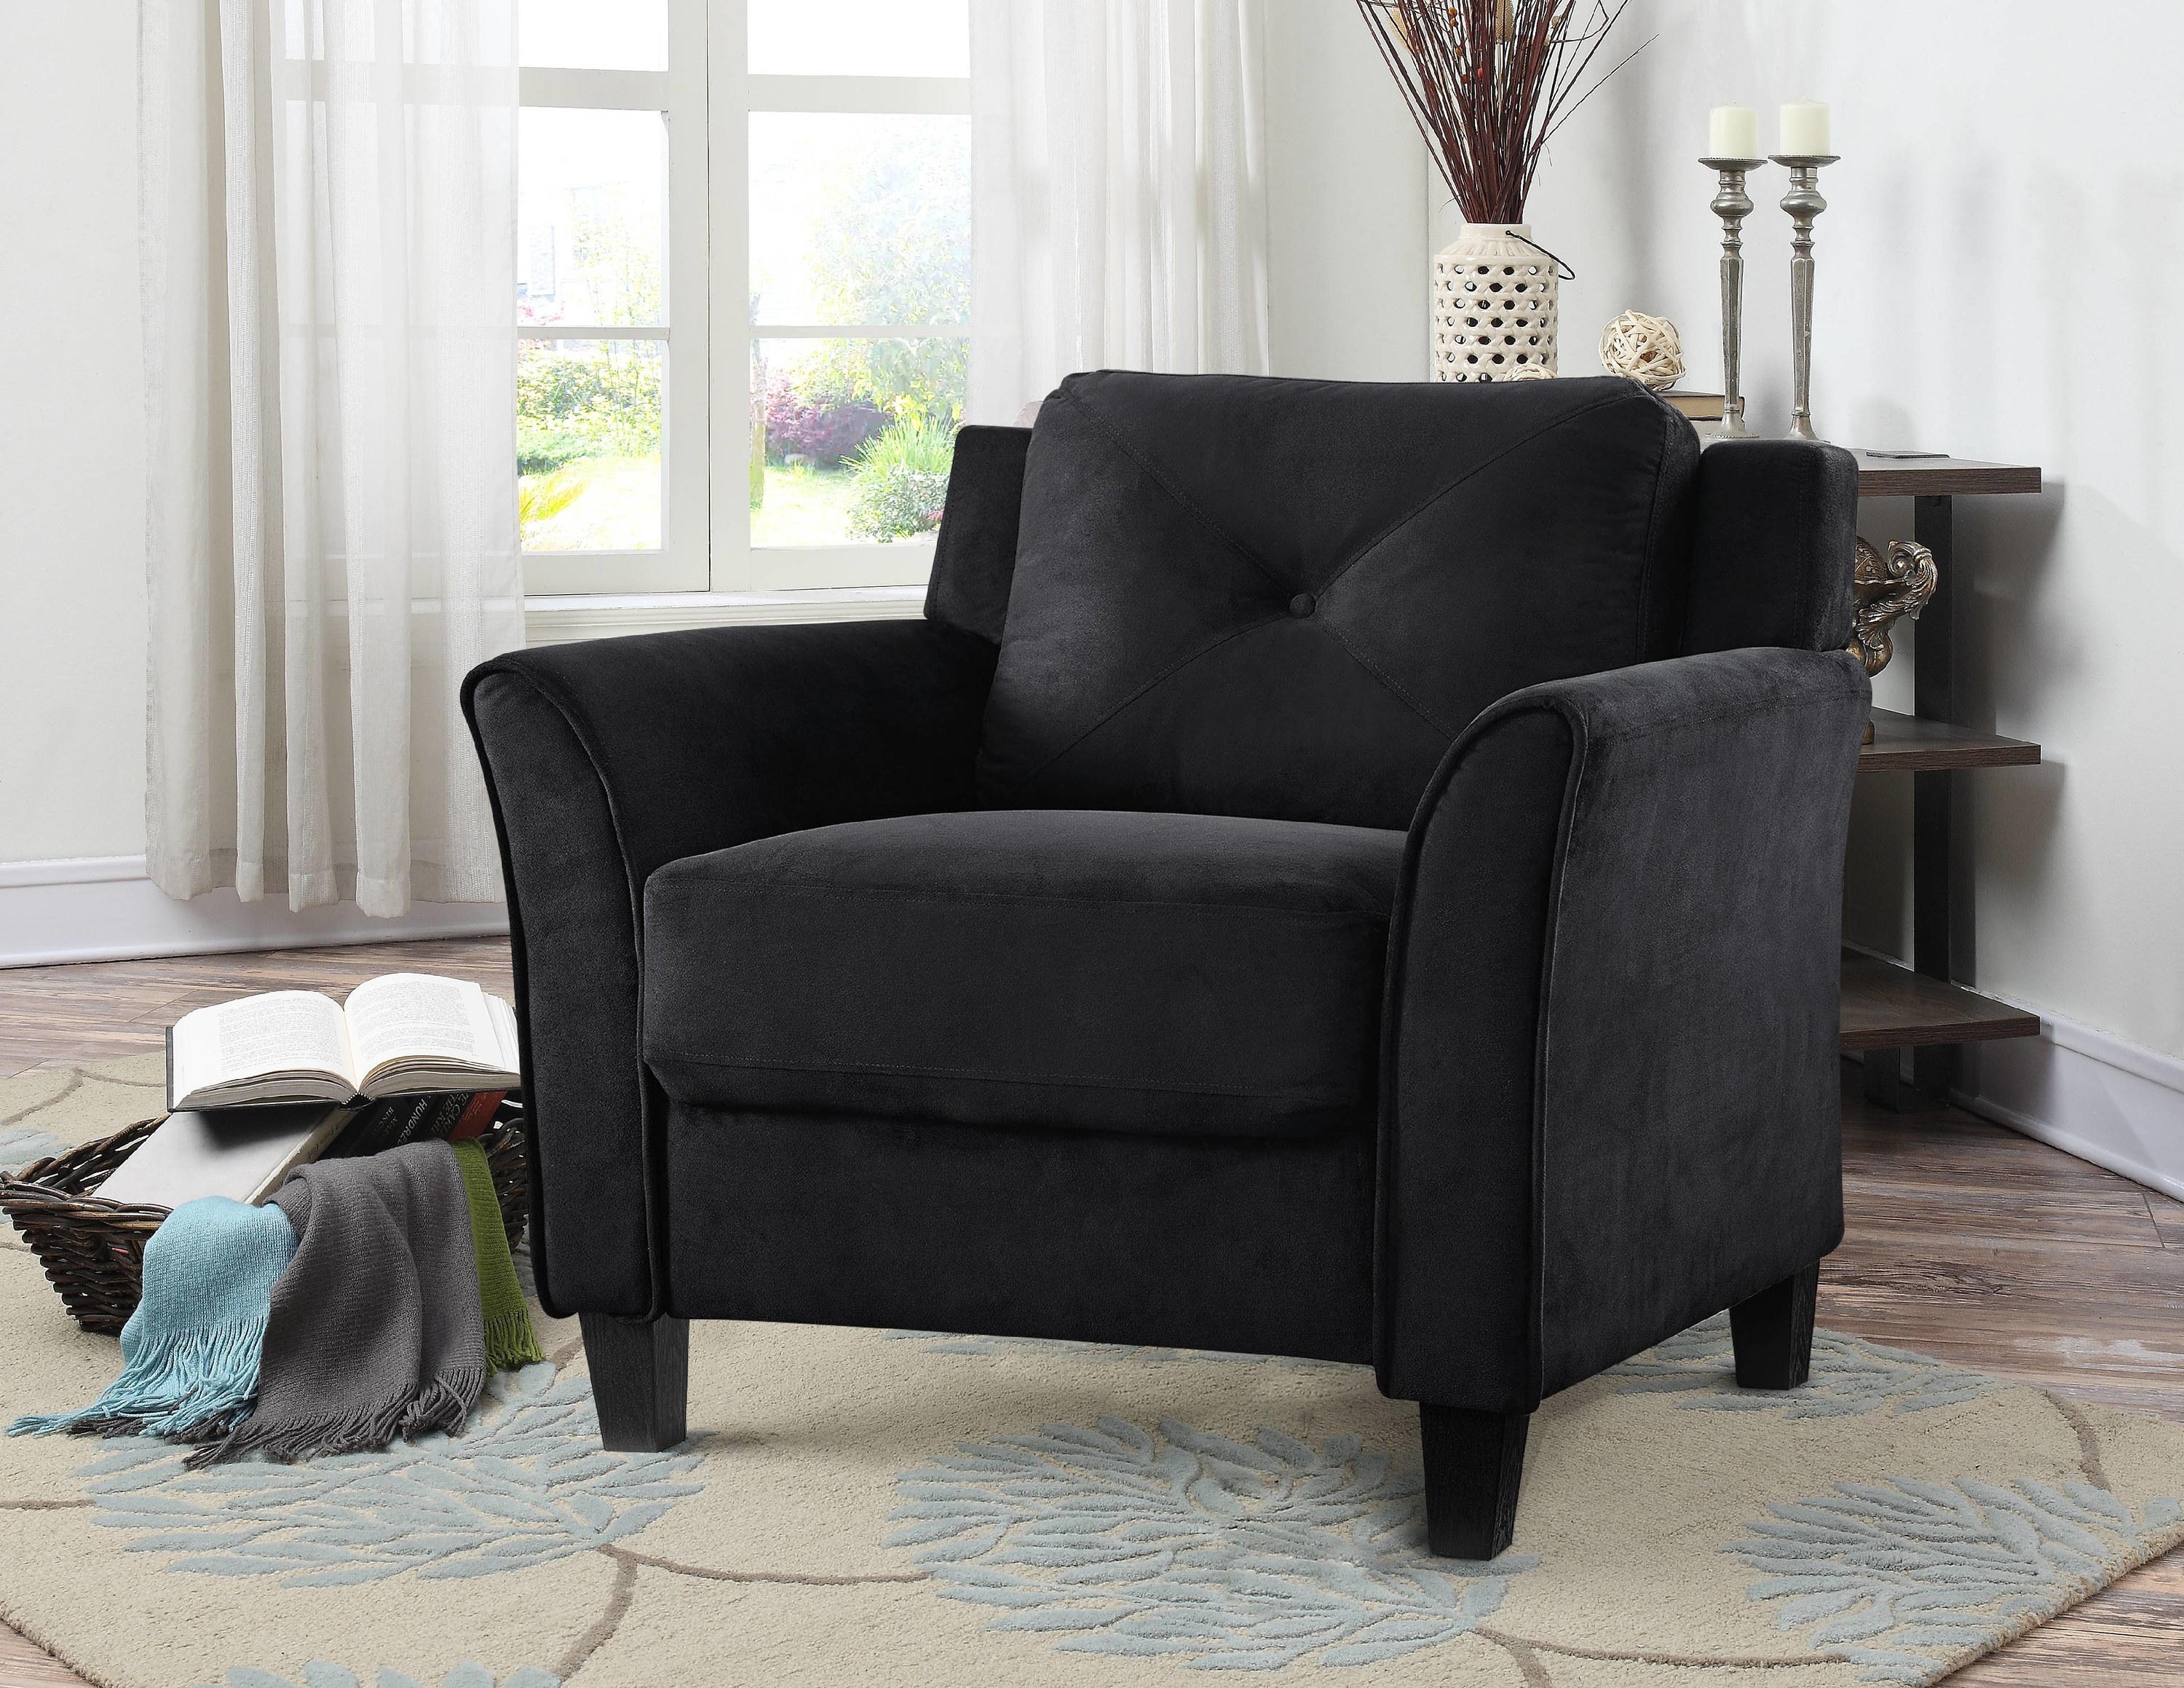 The chair in black, with arm rests that curve slightly outward, a low back, and deep seating area